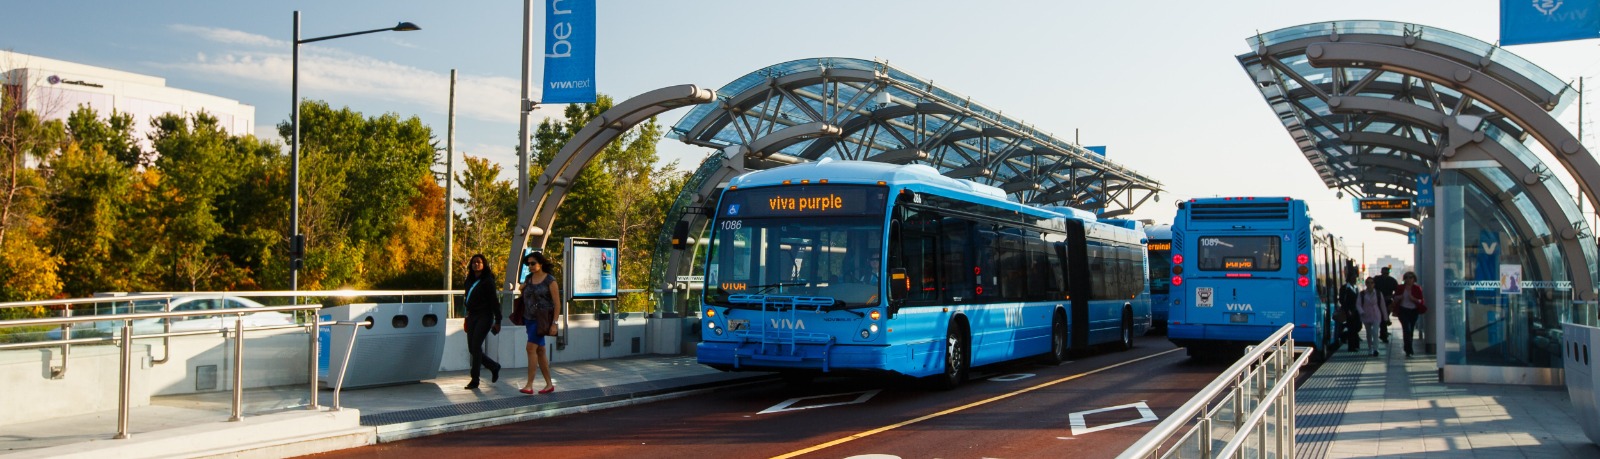 Photo of two Viva buses on the rapidway by the vivastation.